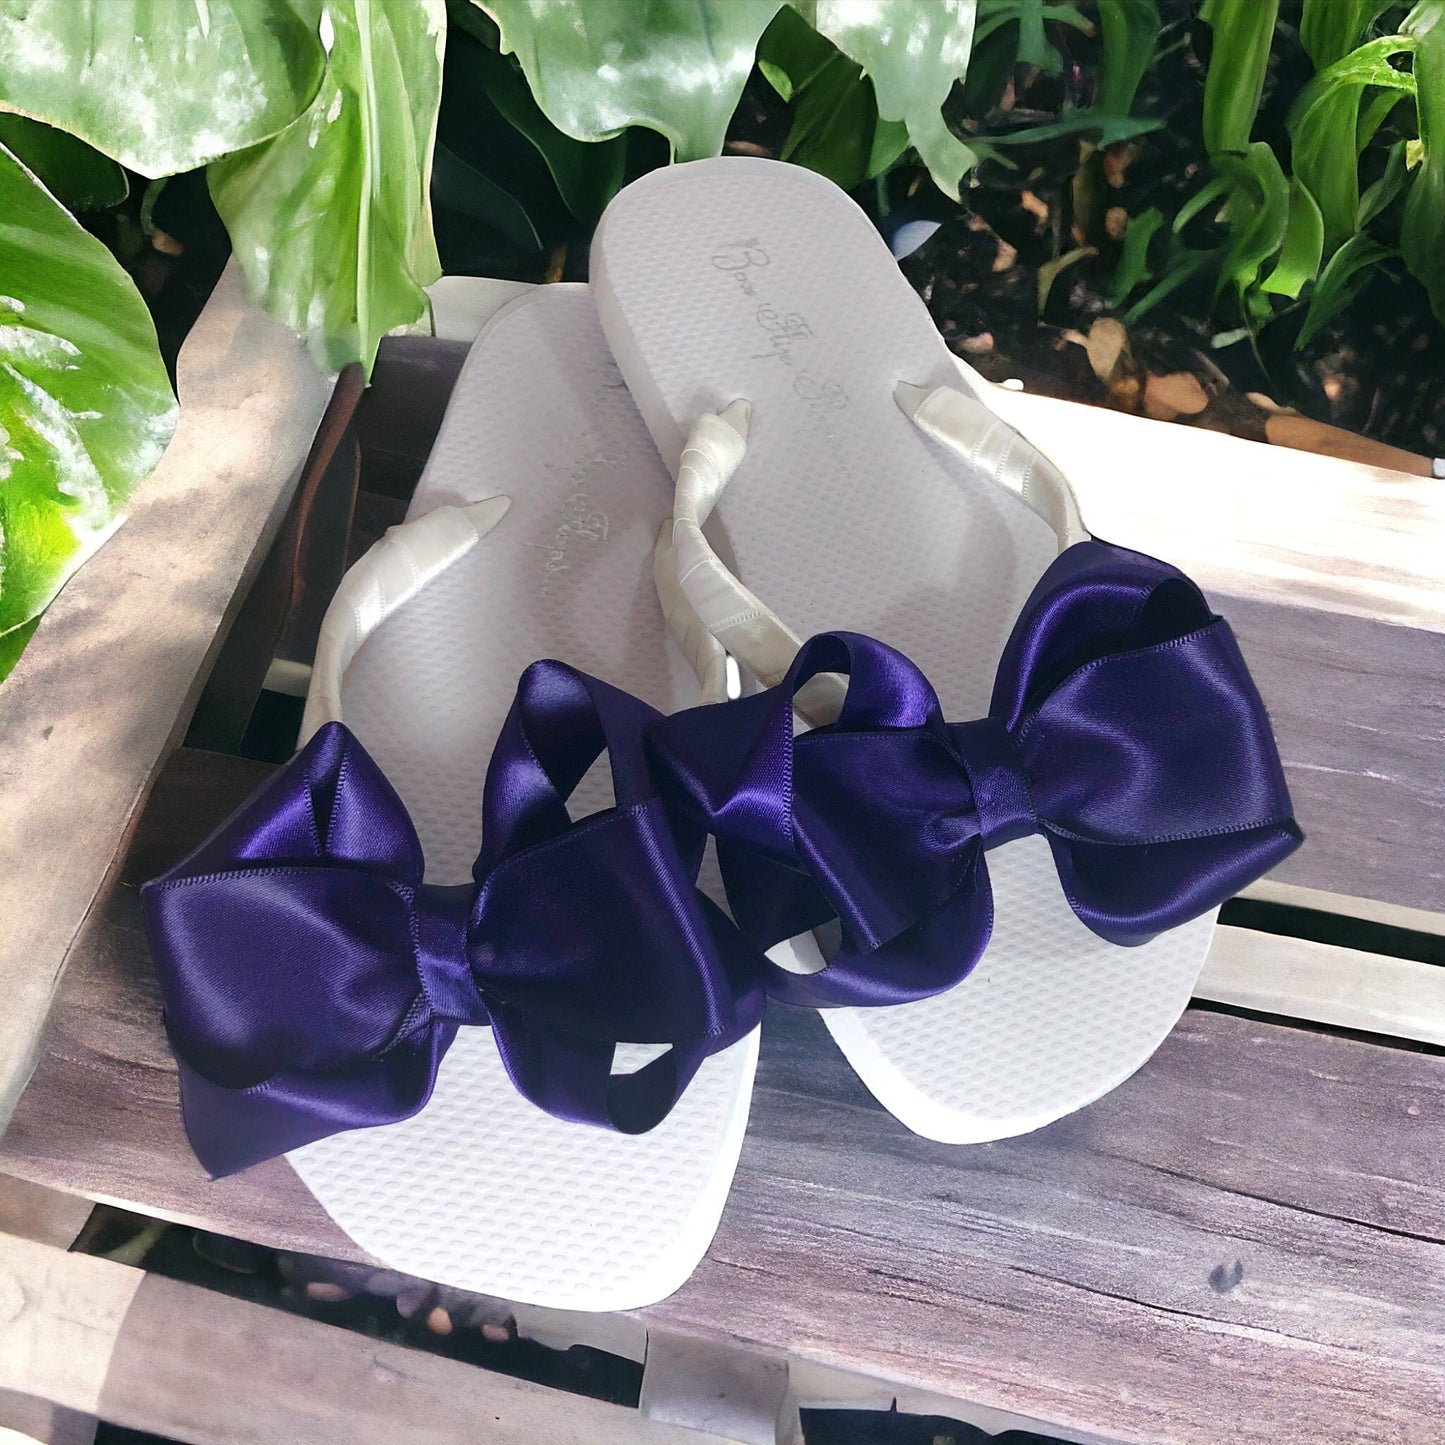 Purple Satin Bow Flip Flops for Ladies & Girls - Customize Yours!